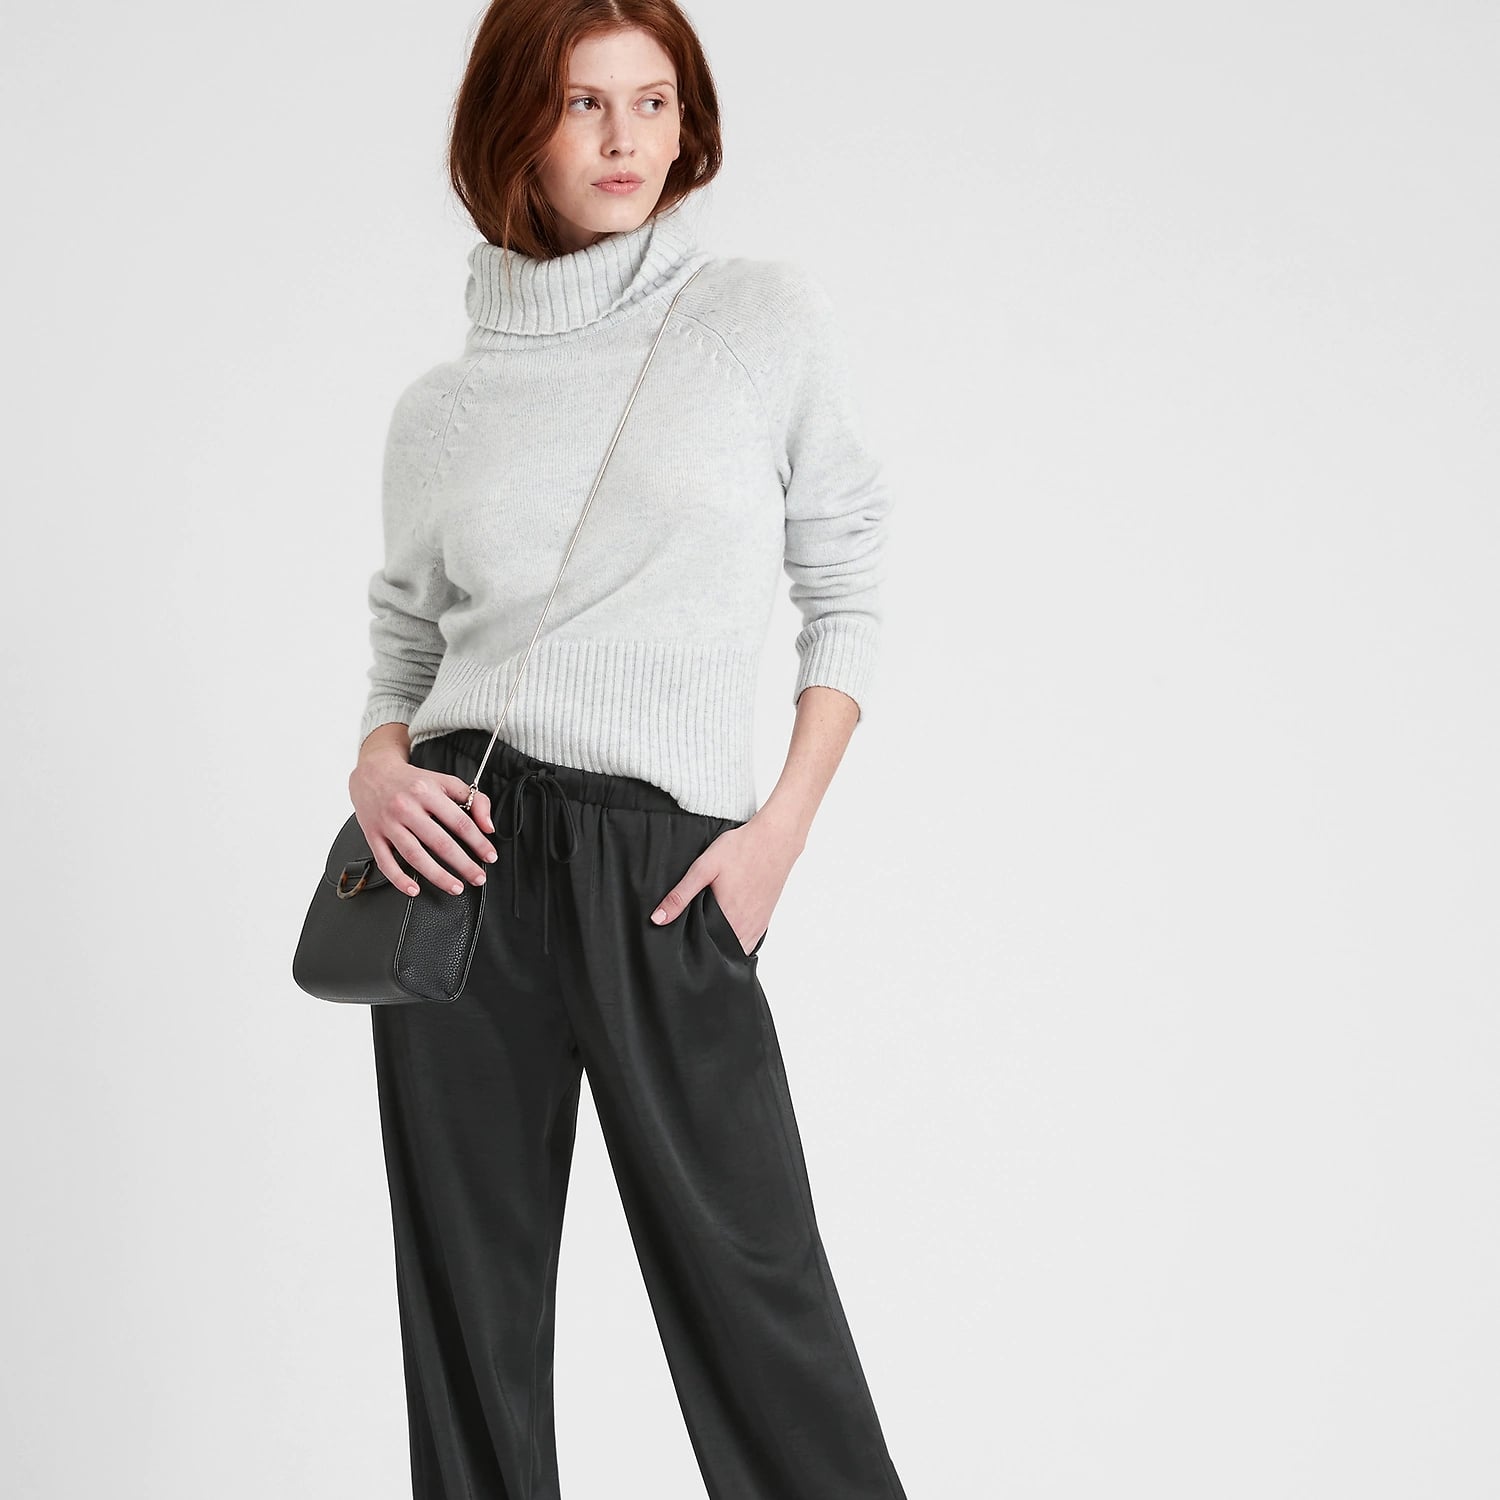 The Most Comfortable Pants For Women From Banana Republic 